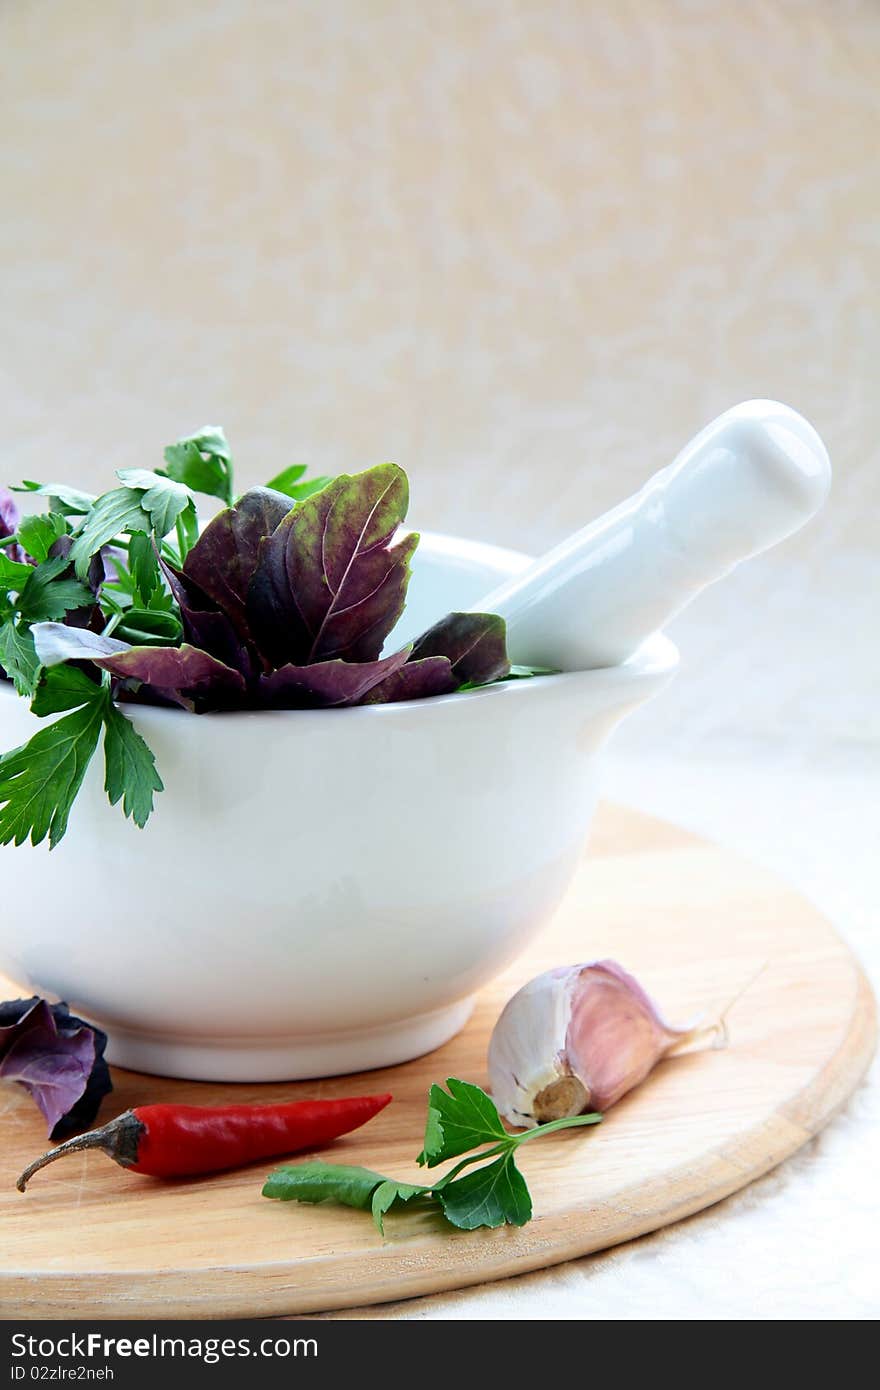 Mortar and pestle with herbs on a wooden board